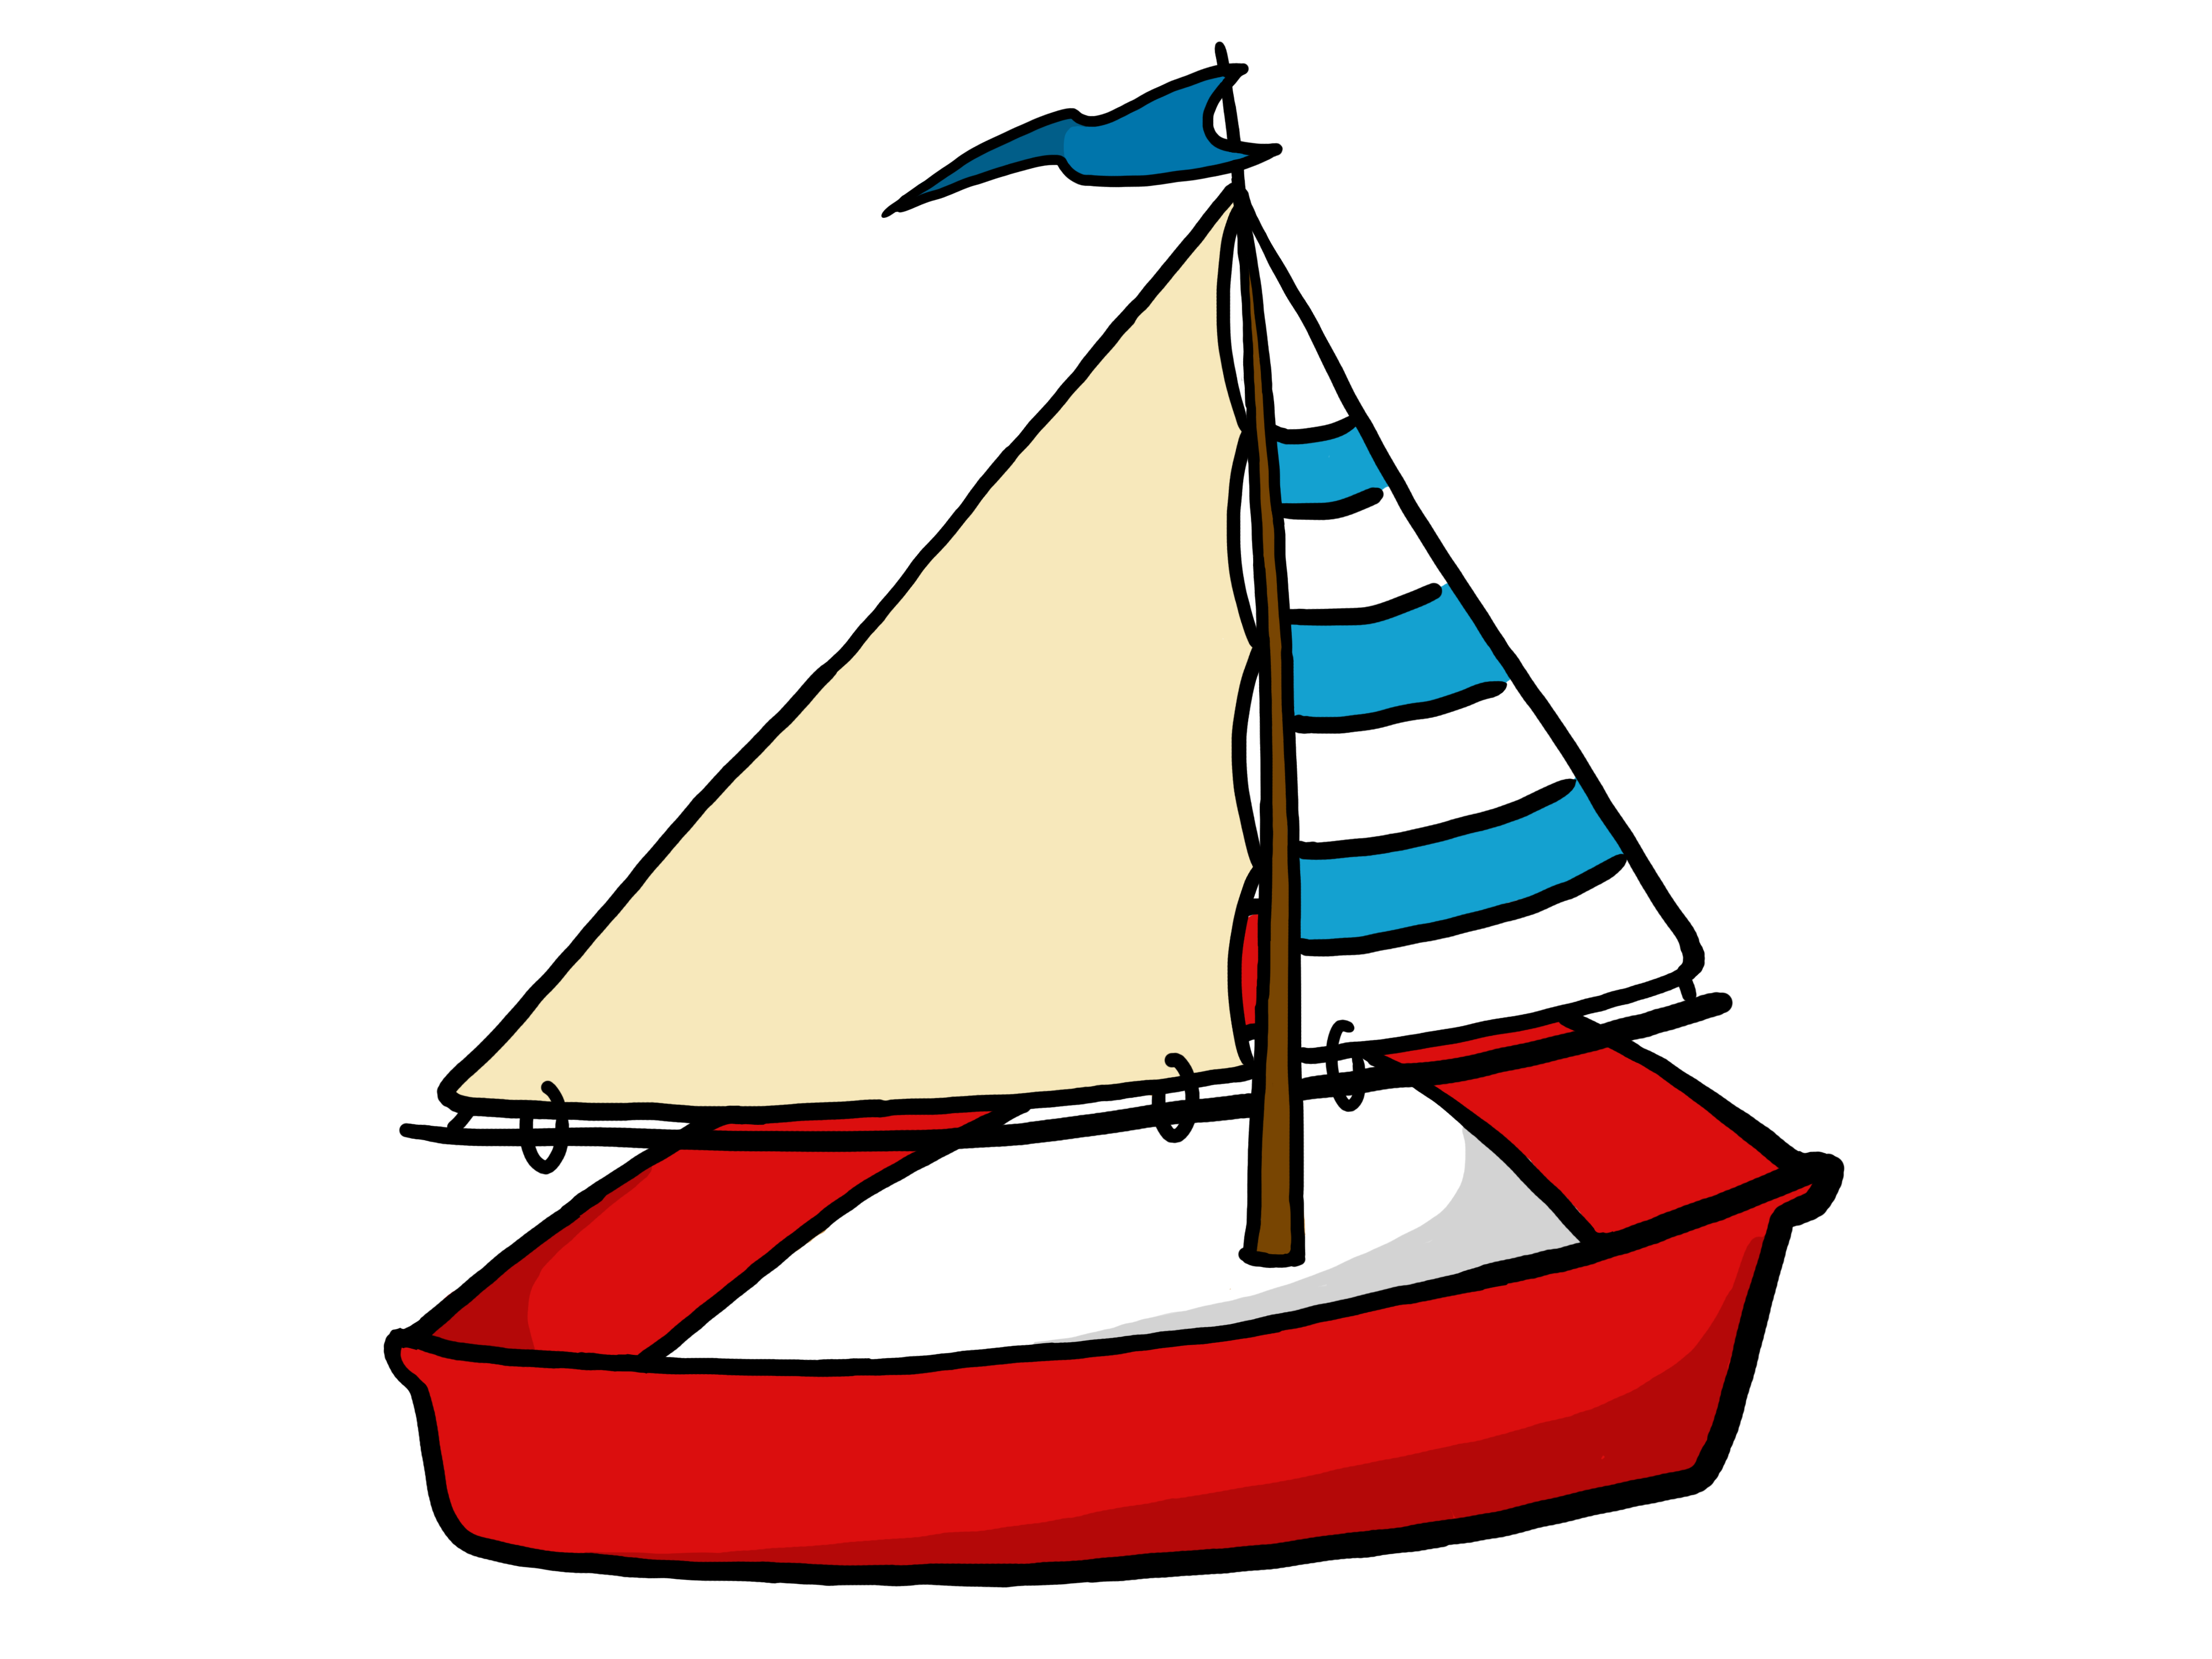 Clipart Of A Sailing Boat - ClipArt Best